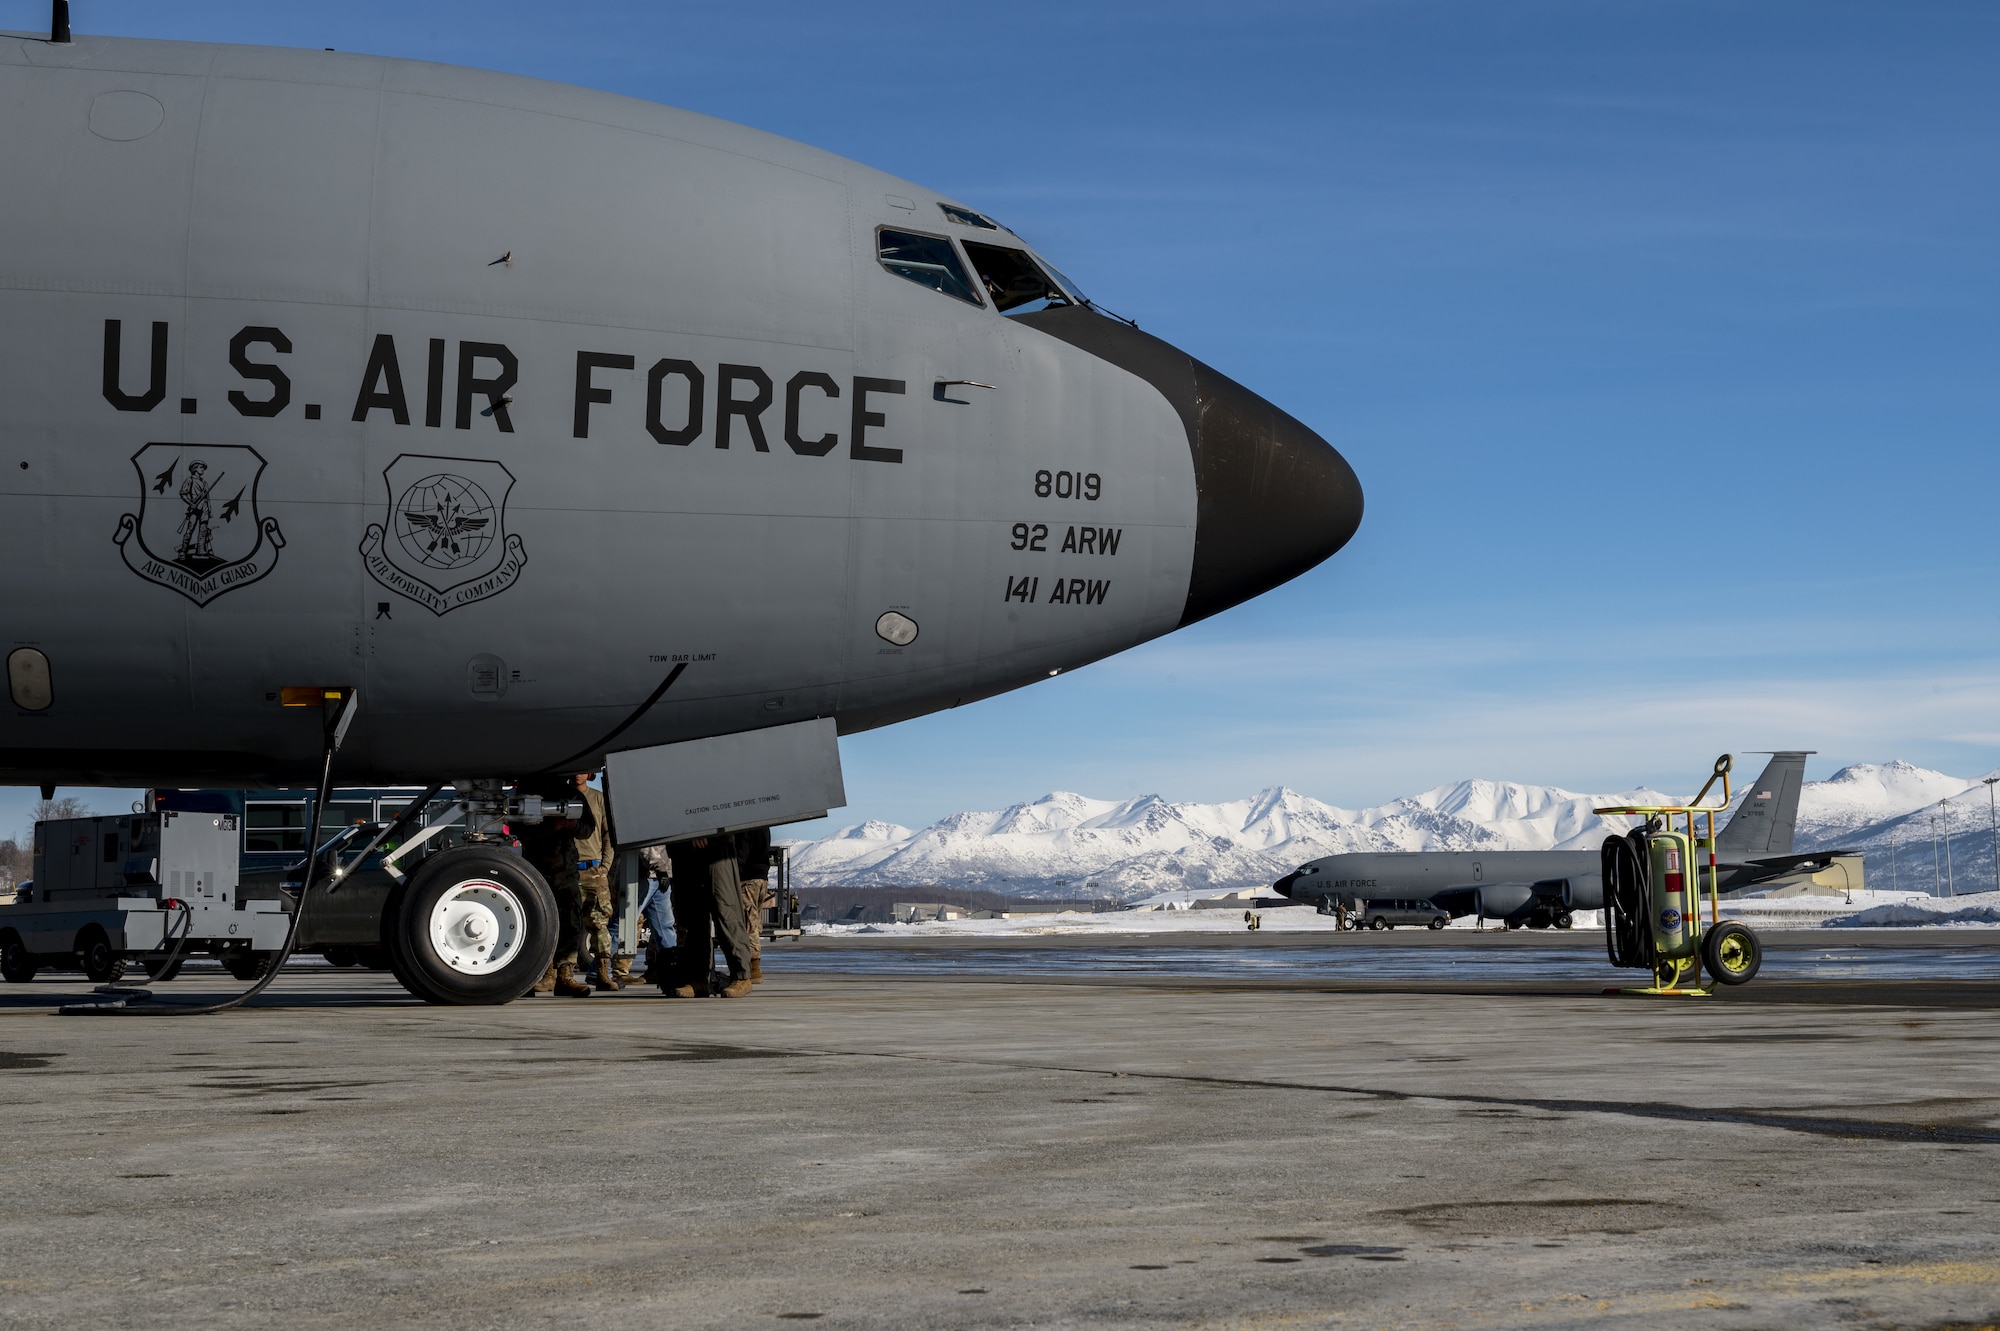 A U.S. Air Force KC-135 Stratotanker is parked on the flightline in preparation for a an air refueling coronet mission at Eielson Air Force Base, Alaska, March 7, 2023. Aircrew from the 384th Air Refueling Squadron conducted an air refueling coronet with Marines from the Marine Fighter Attack Squadron 312, demonstrating the critical role mobility forces have in projecting the joint force anywhere, anytime. (U.S. Air Force photo by Staff Sgt. Lawrence Sena)